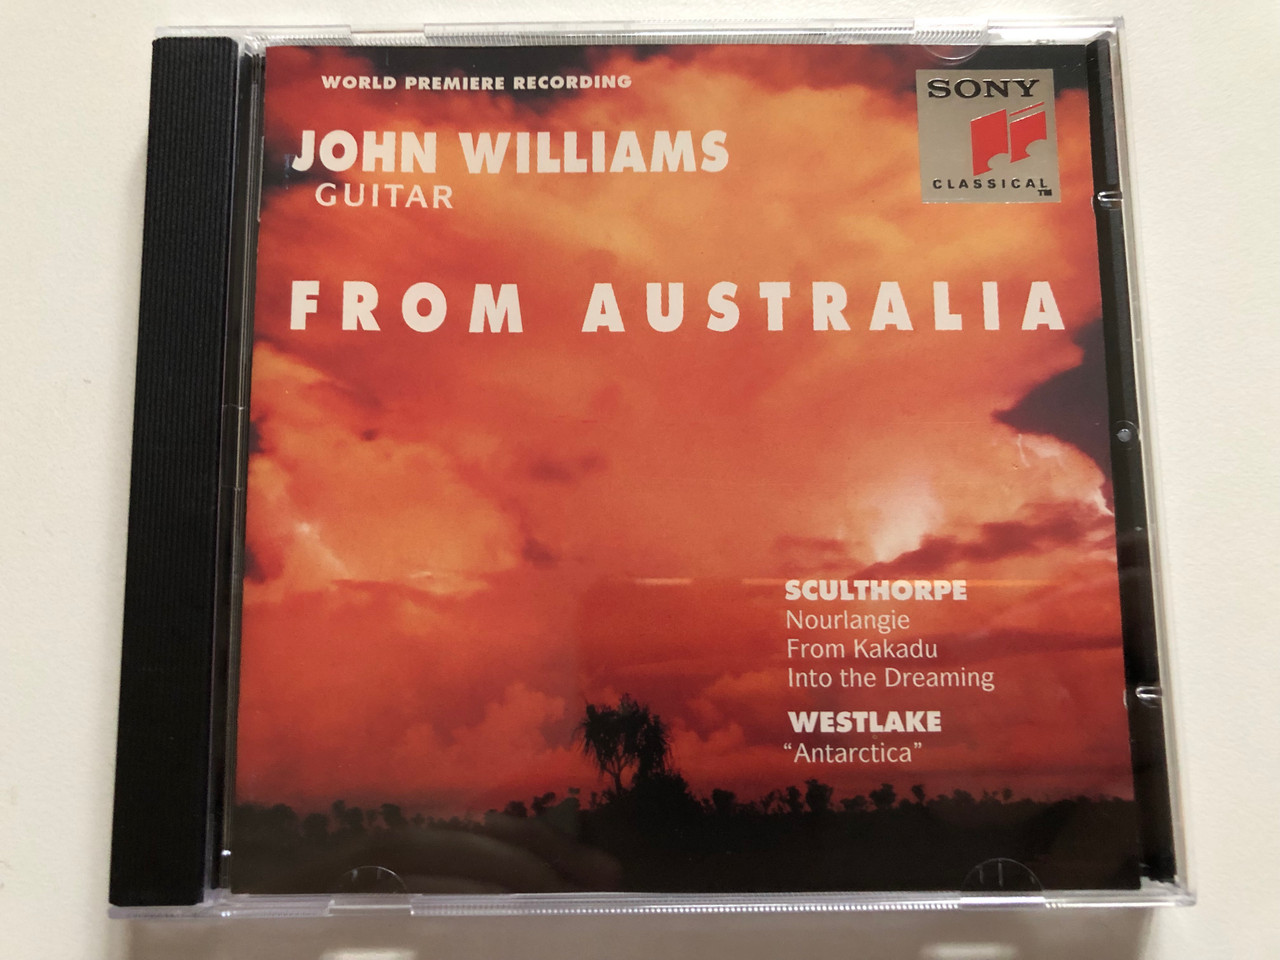 https://cdn10.bigcommerce.com/s-62bdpkt7pb/products/0/images/313061/John_Williams_guitar_From_Australia_-_Sculthorpe_Nourlangie_From_Kakadu_Into_the_Dreaming_Westlake_Antarctica_Sony_Classical_Audio_CD_1994_SK_53_361_1__82777.1700481420.1280.1280.JPG?c=2